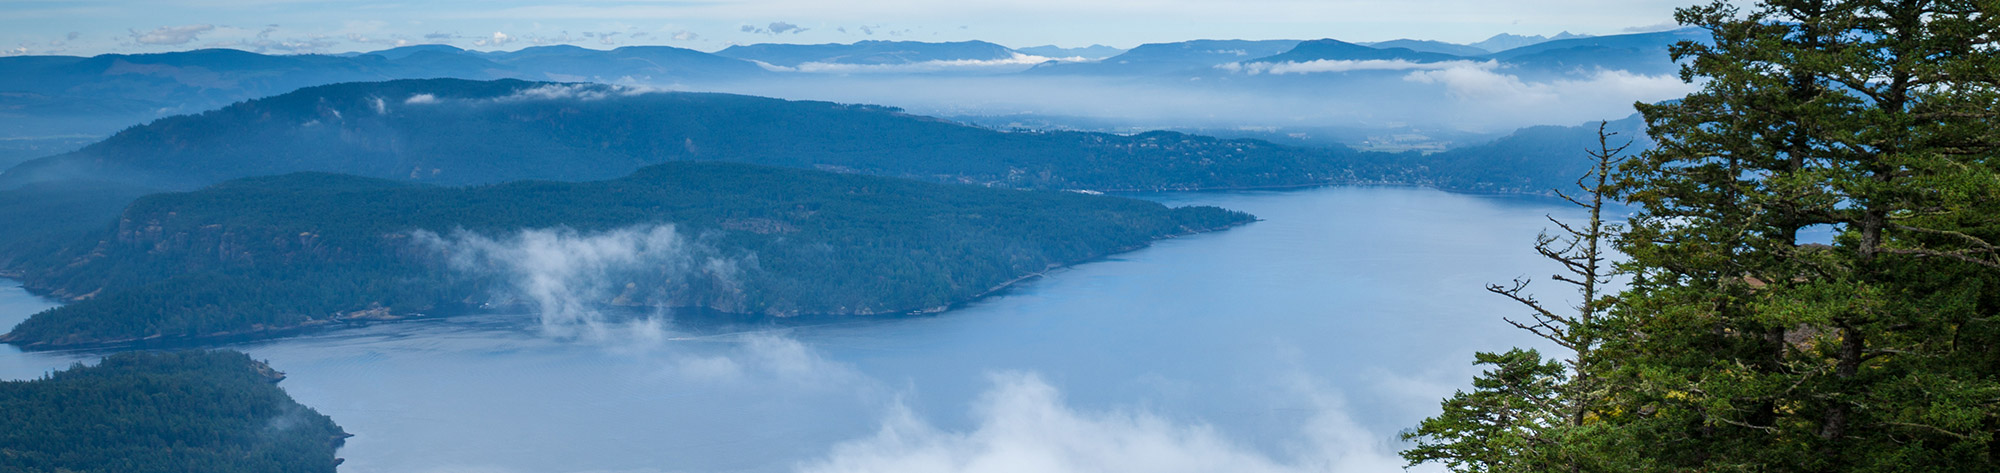 View of the Gulf Islands from Saltspring Island's Mount Maxwell Provincial Park